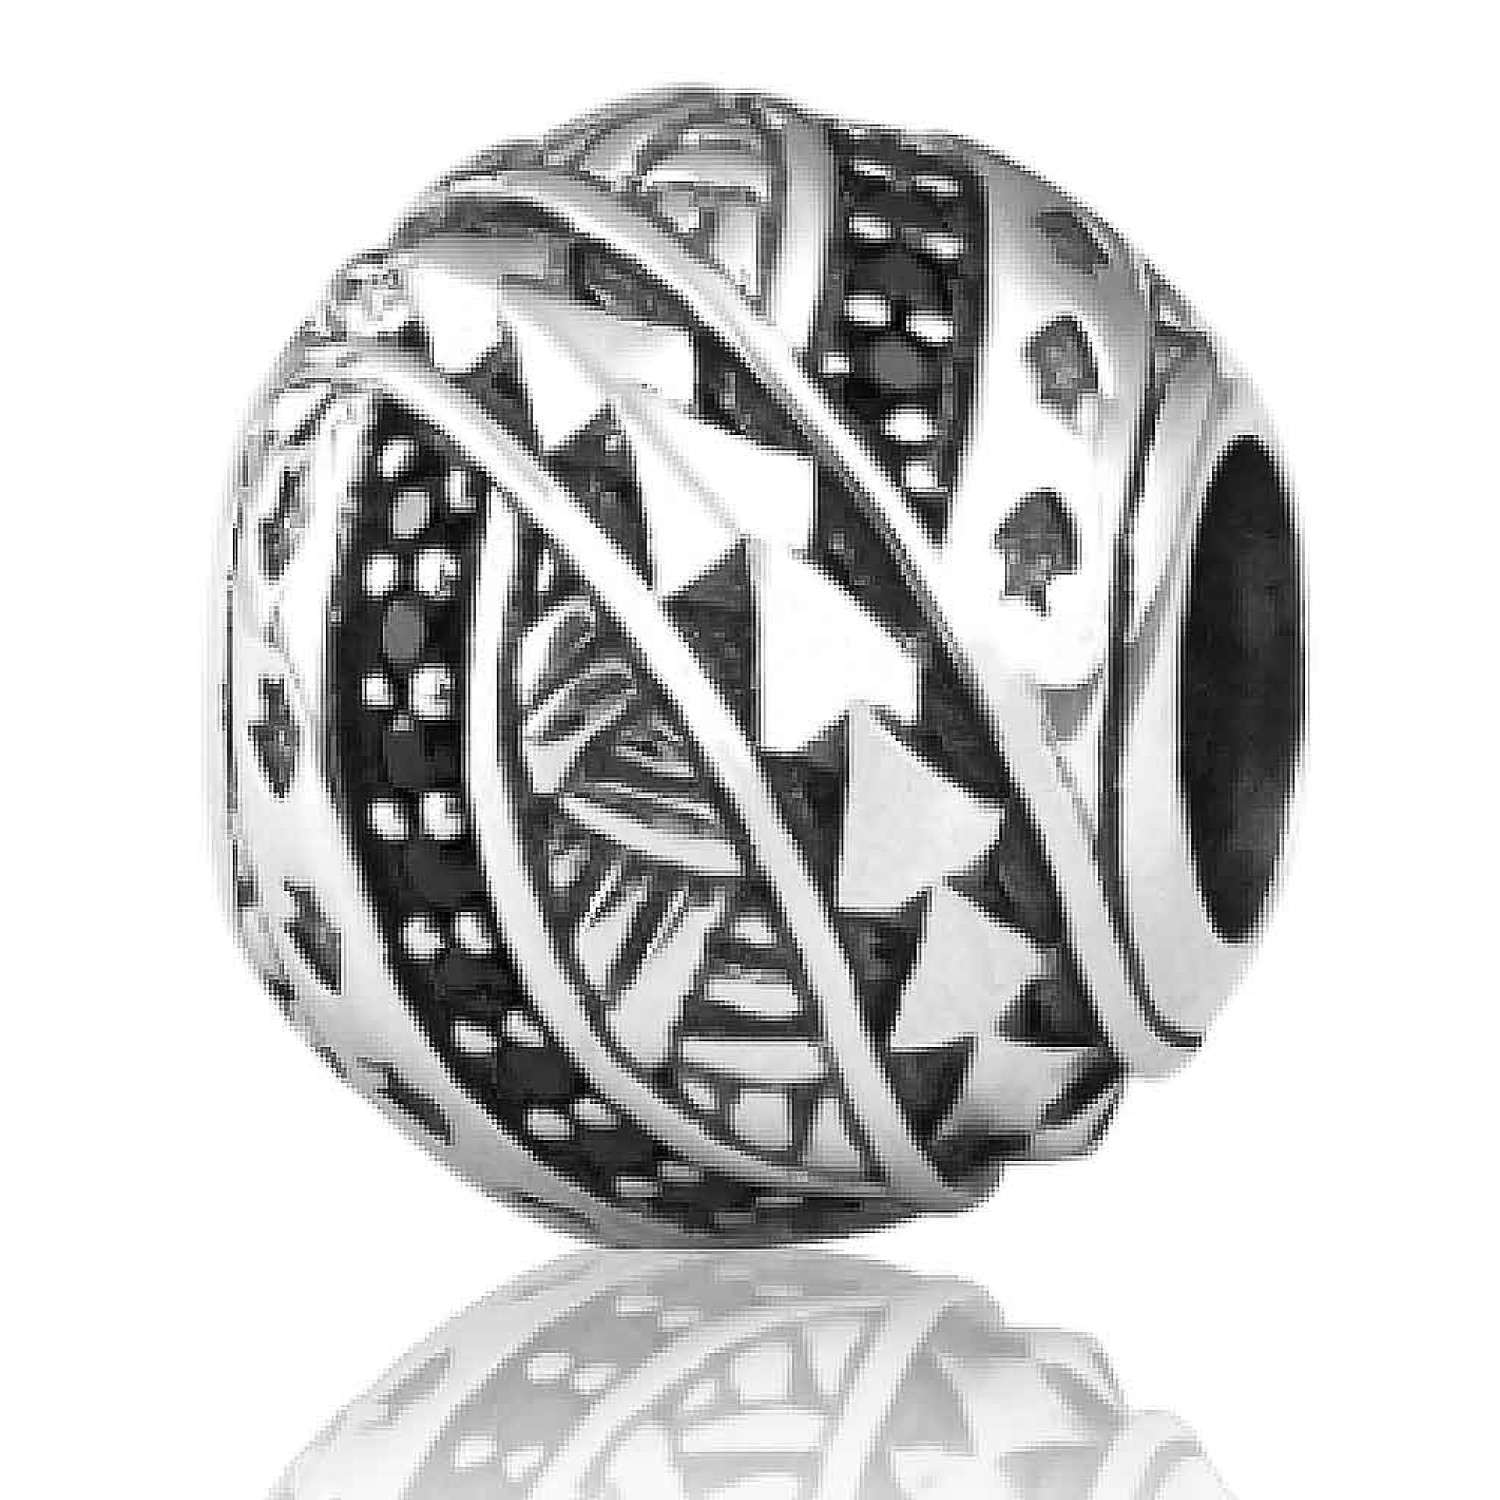 LK244SP Evolve Silver Charm Guiding Light. The unique patterns deeply etched into this charm act as a guide, navigating us on our chosen direction in life, just as our ancestors navigated the world by reading the position of the sun (Te Rā), the stars (Ng